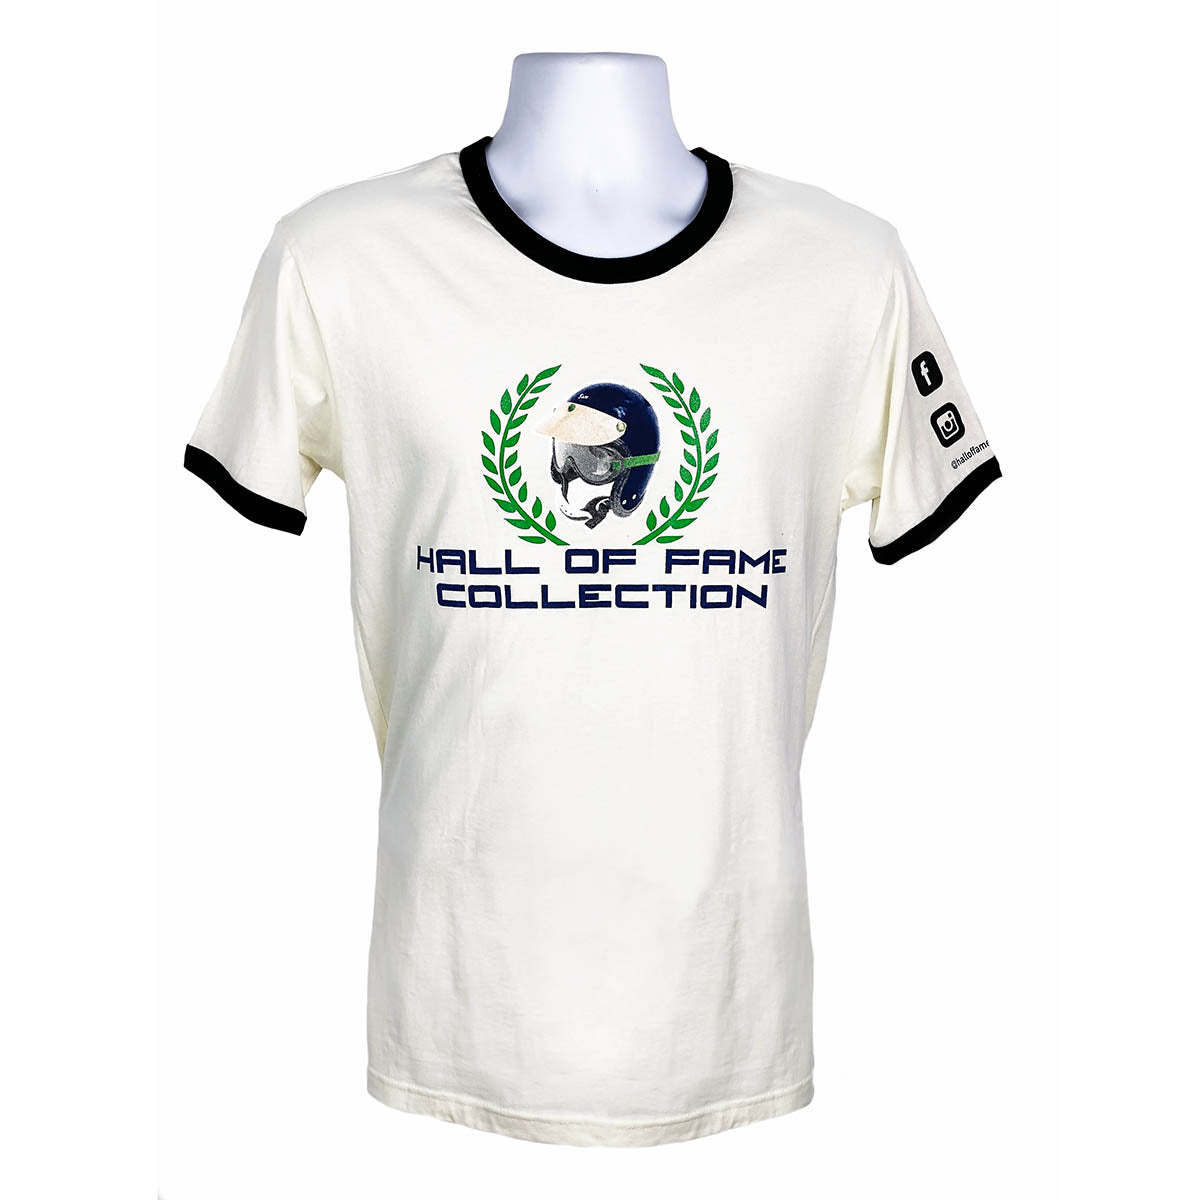 Official Hall of Fame Collection Limited Edition T-Shirt I